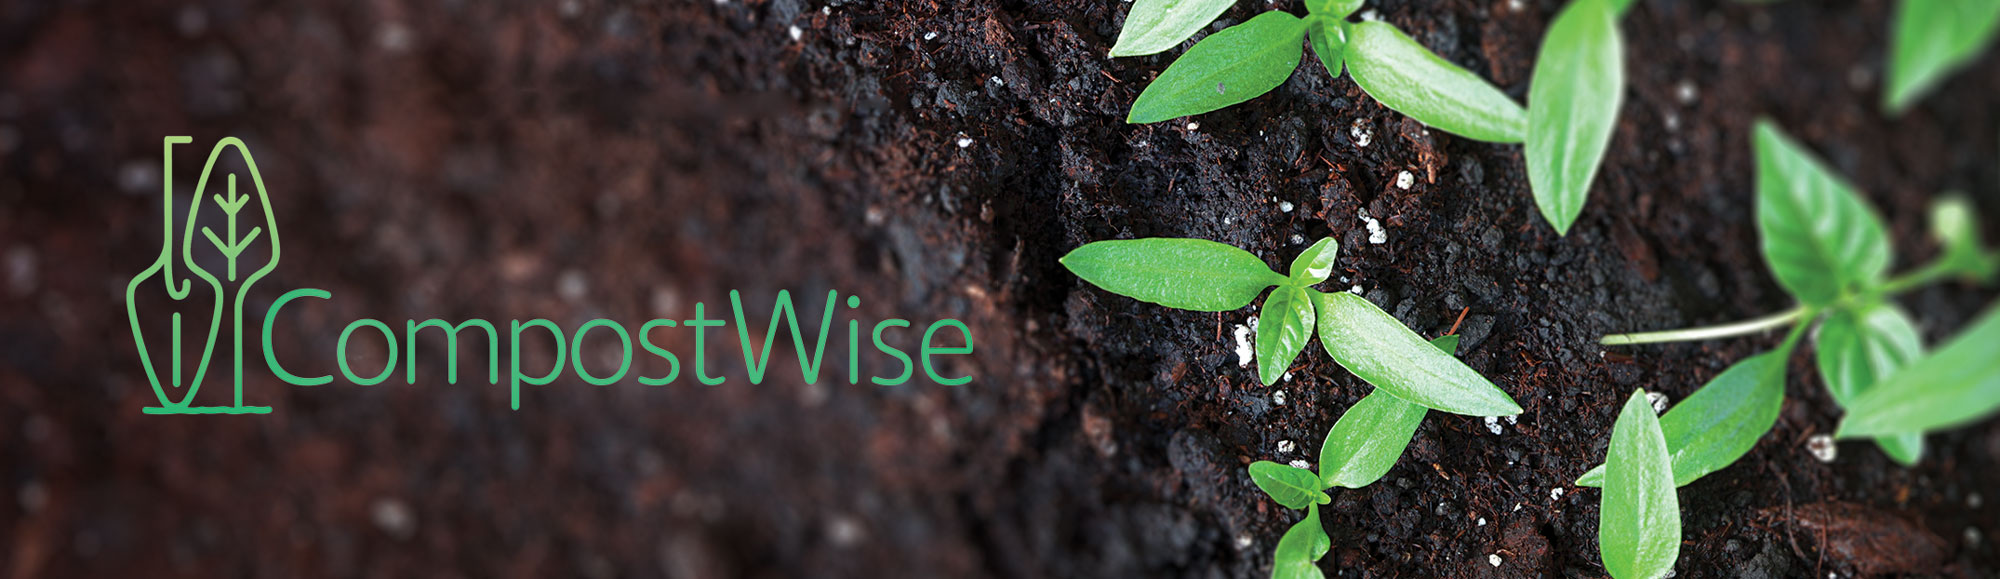 CompostWise logo over an image of rich, brown soil and a green, leafy plant